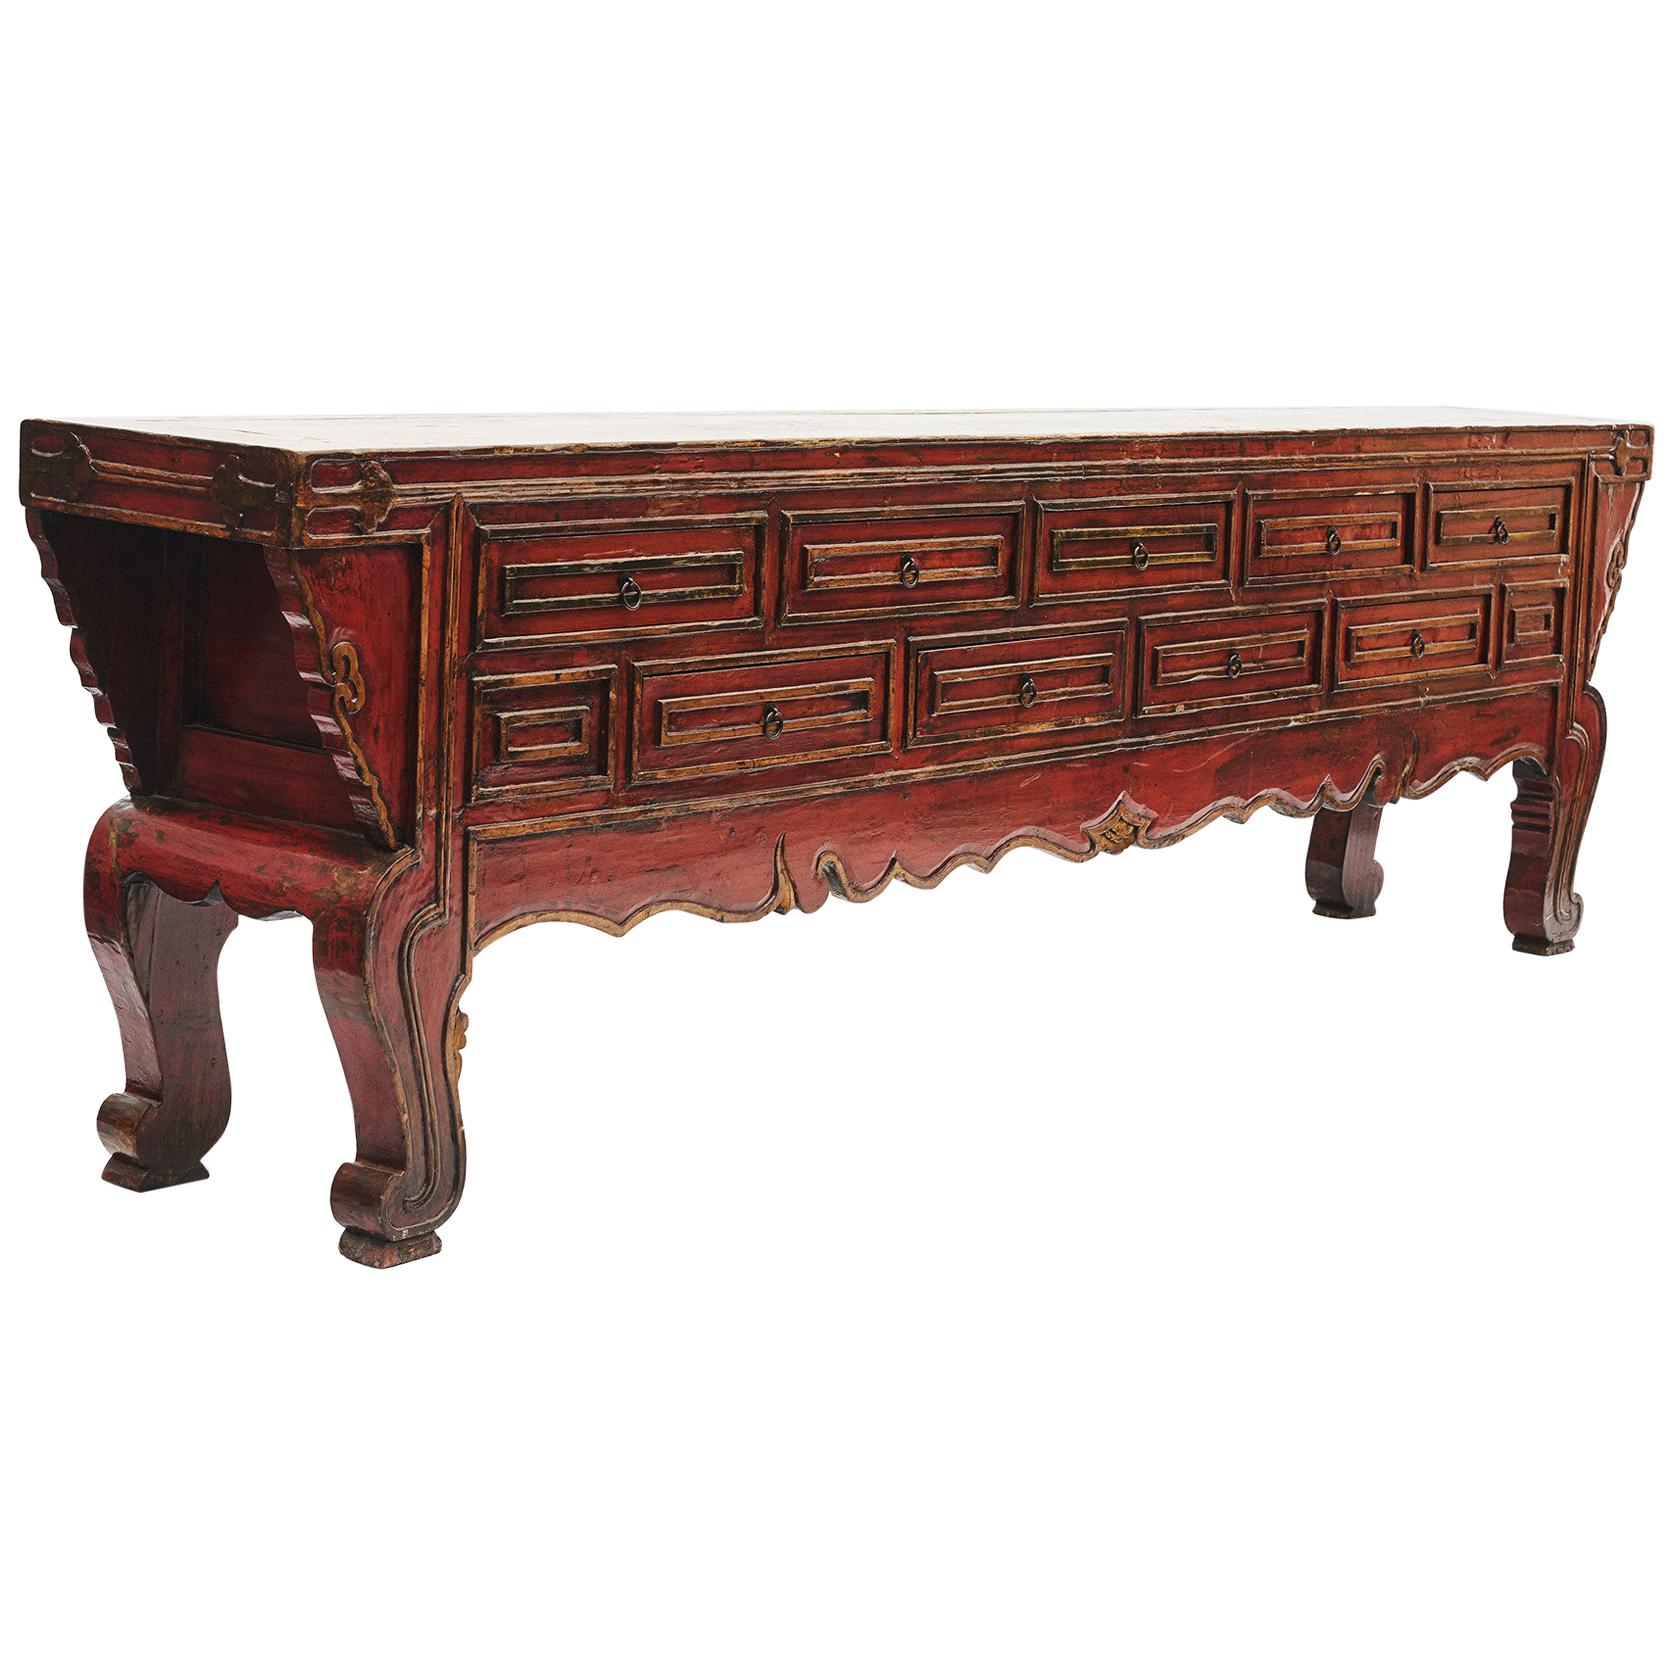 Rare Chinese Alter Sideboard from Shanxi, circa 1840